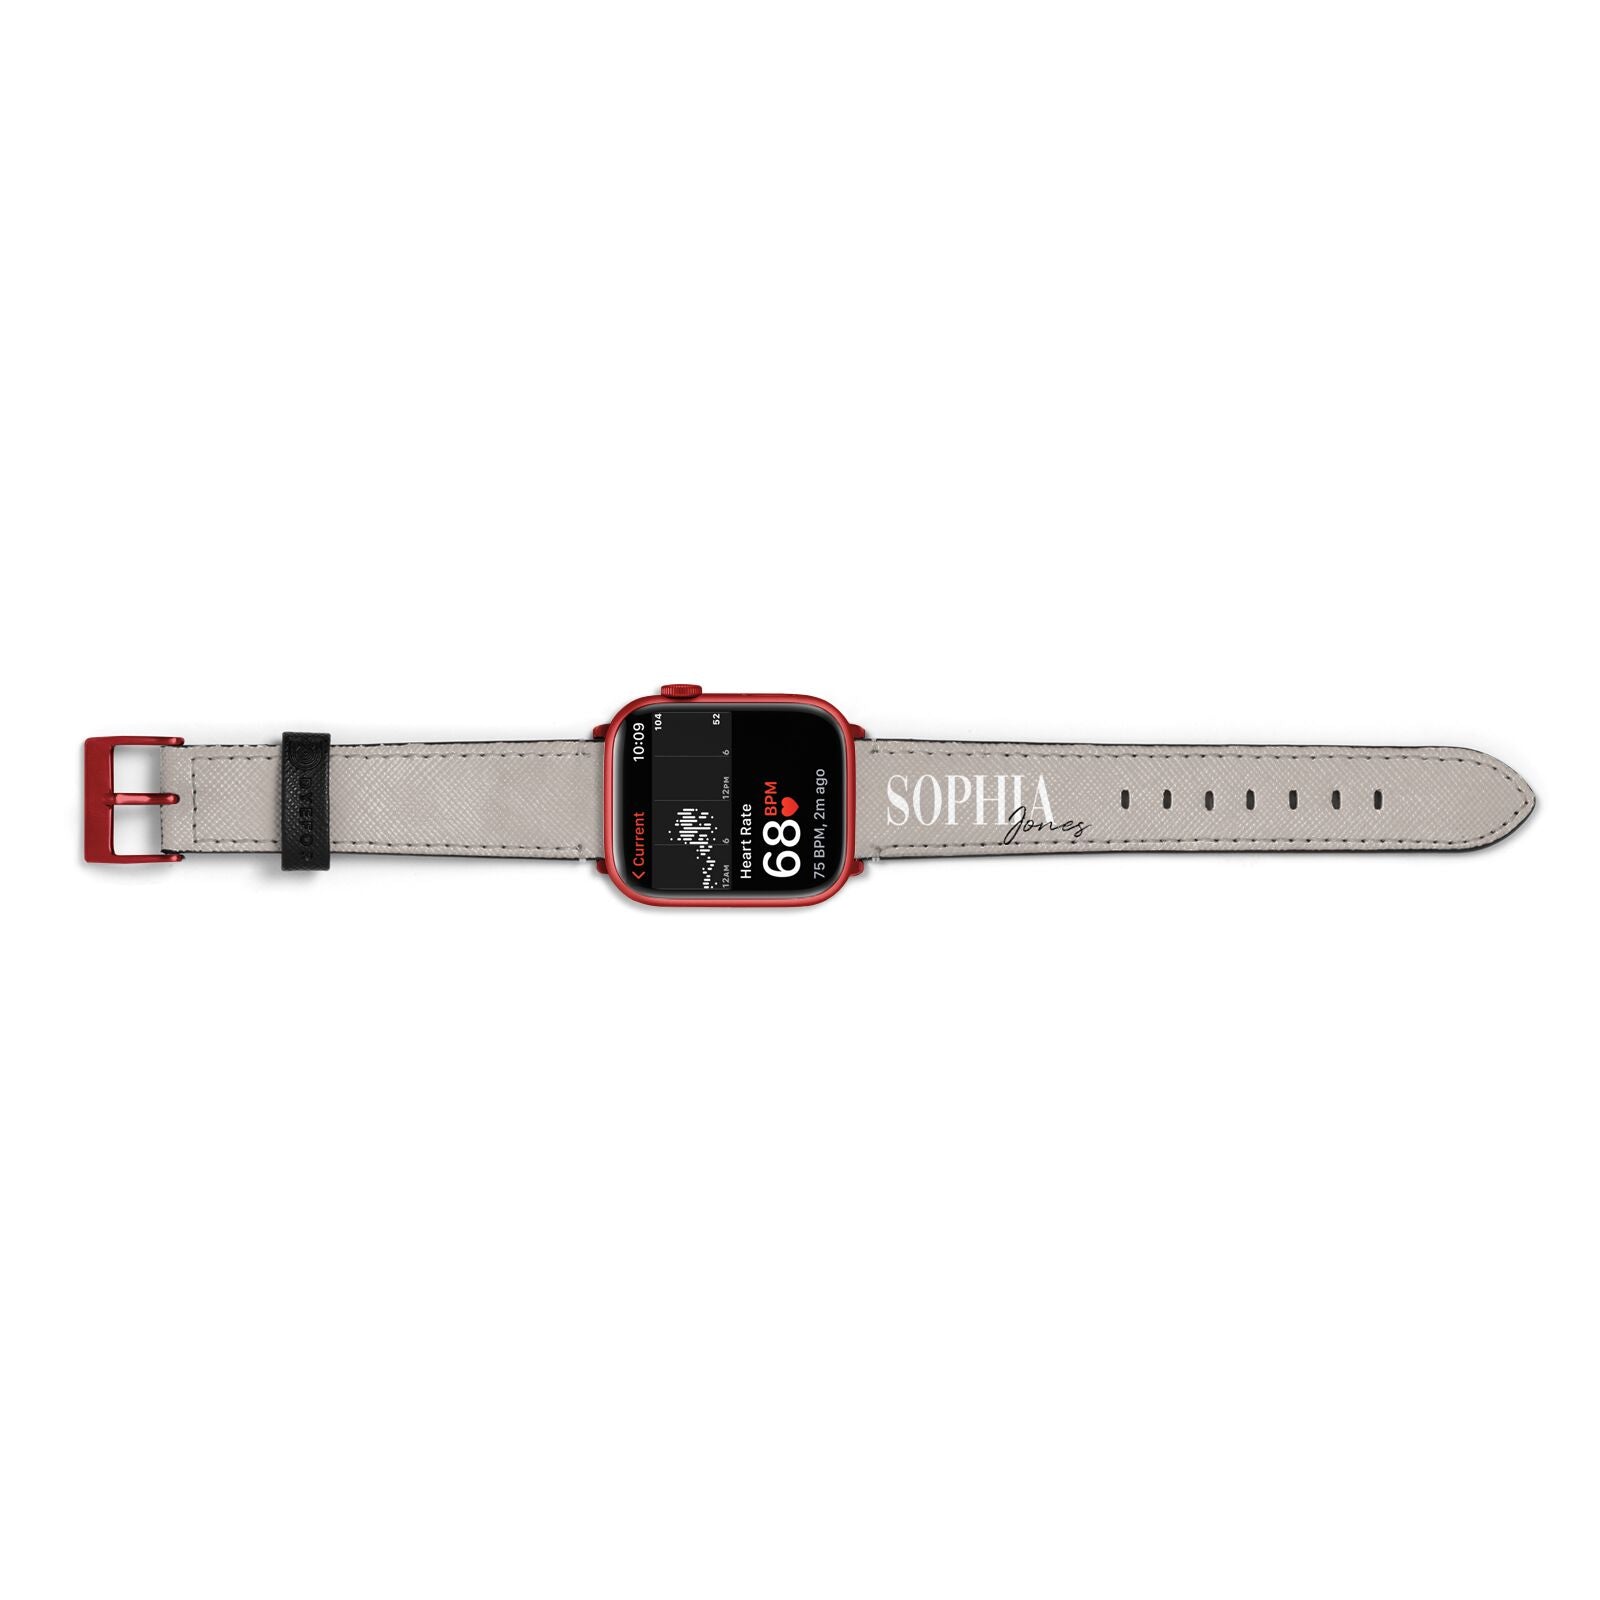 Stone Colour with Personalised Name Apple Watch Strap Size 38mm Landscape Image Red Hardware